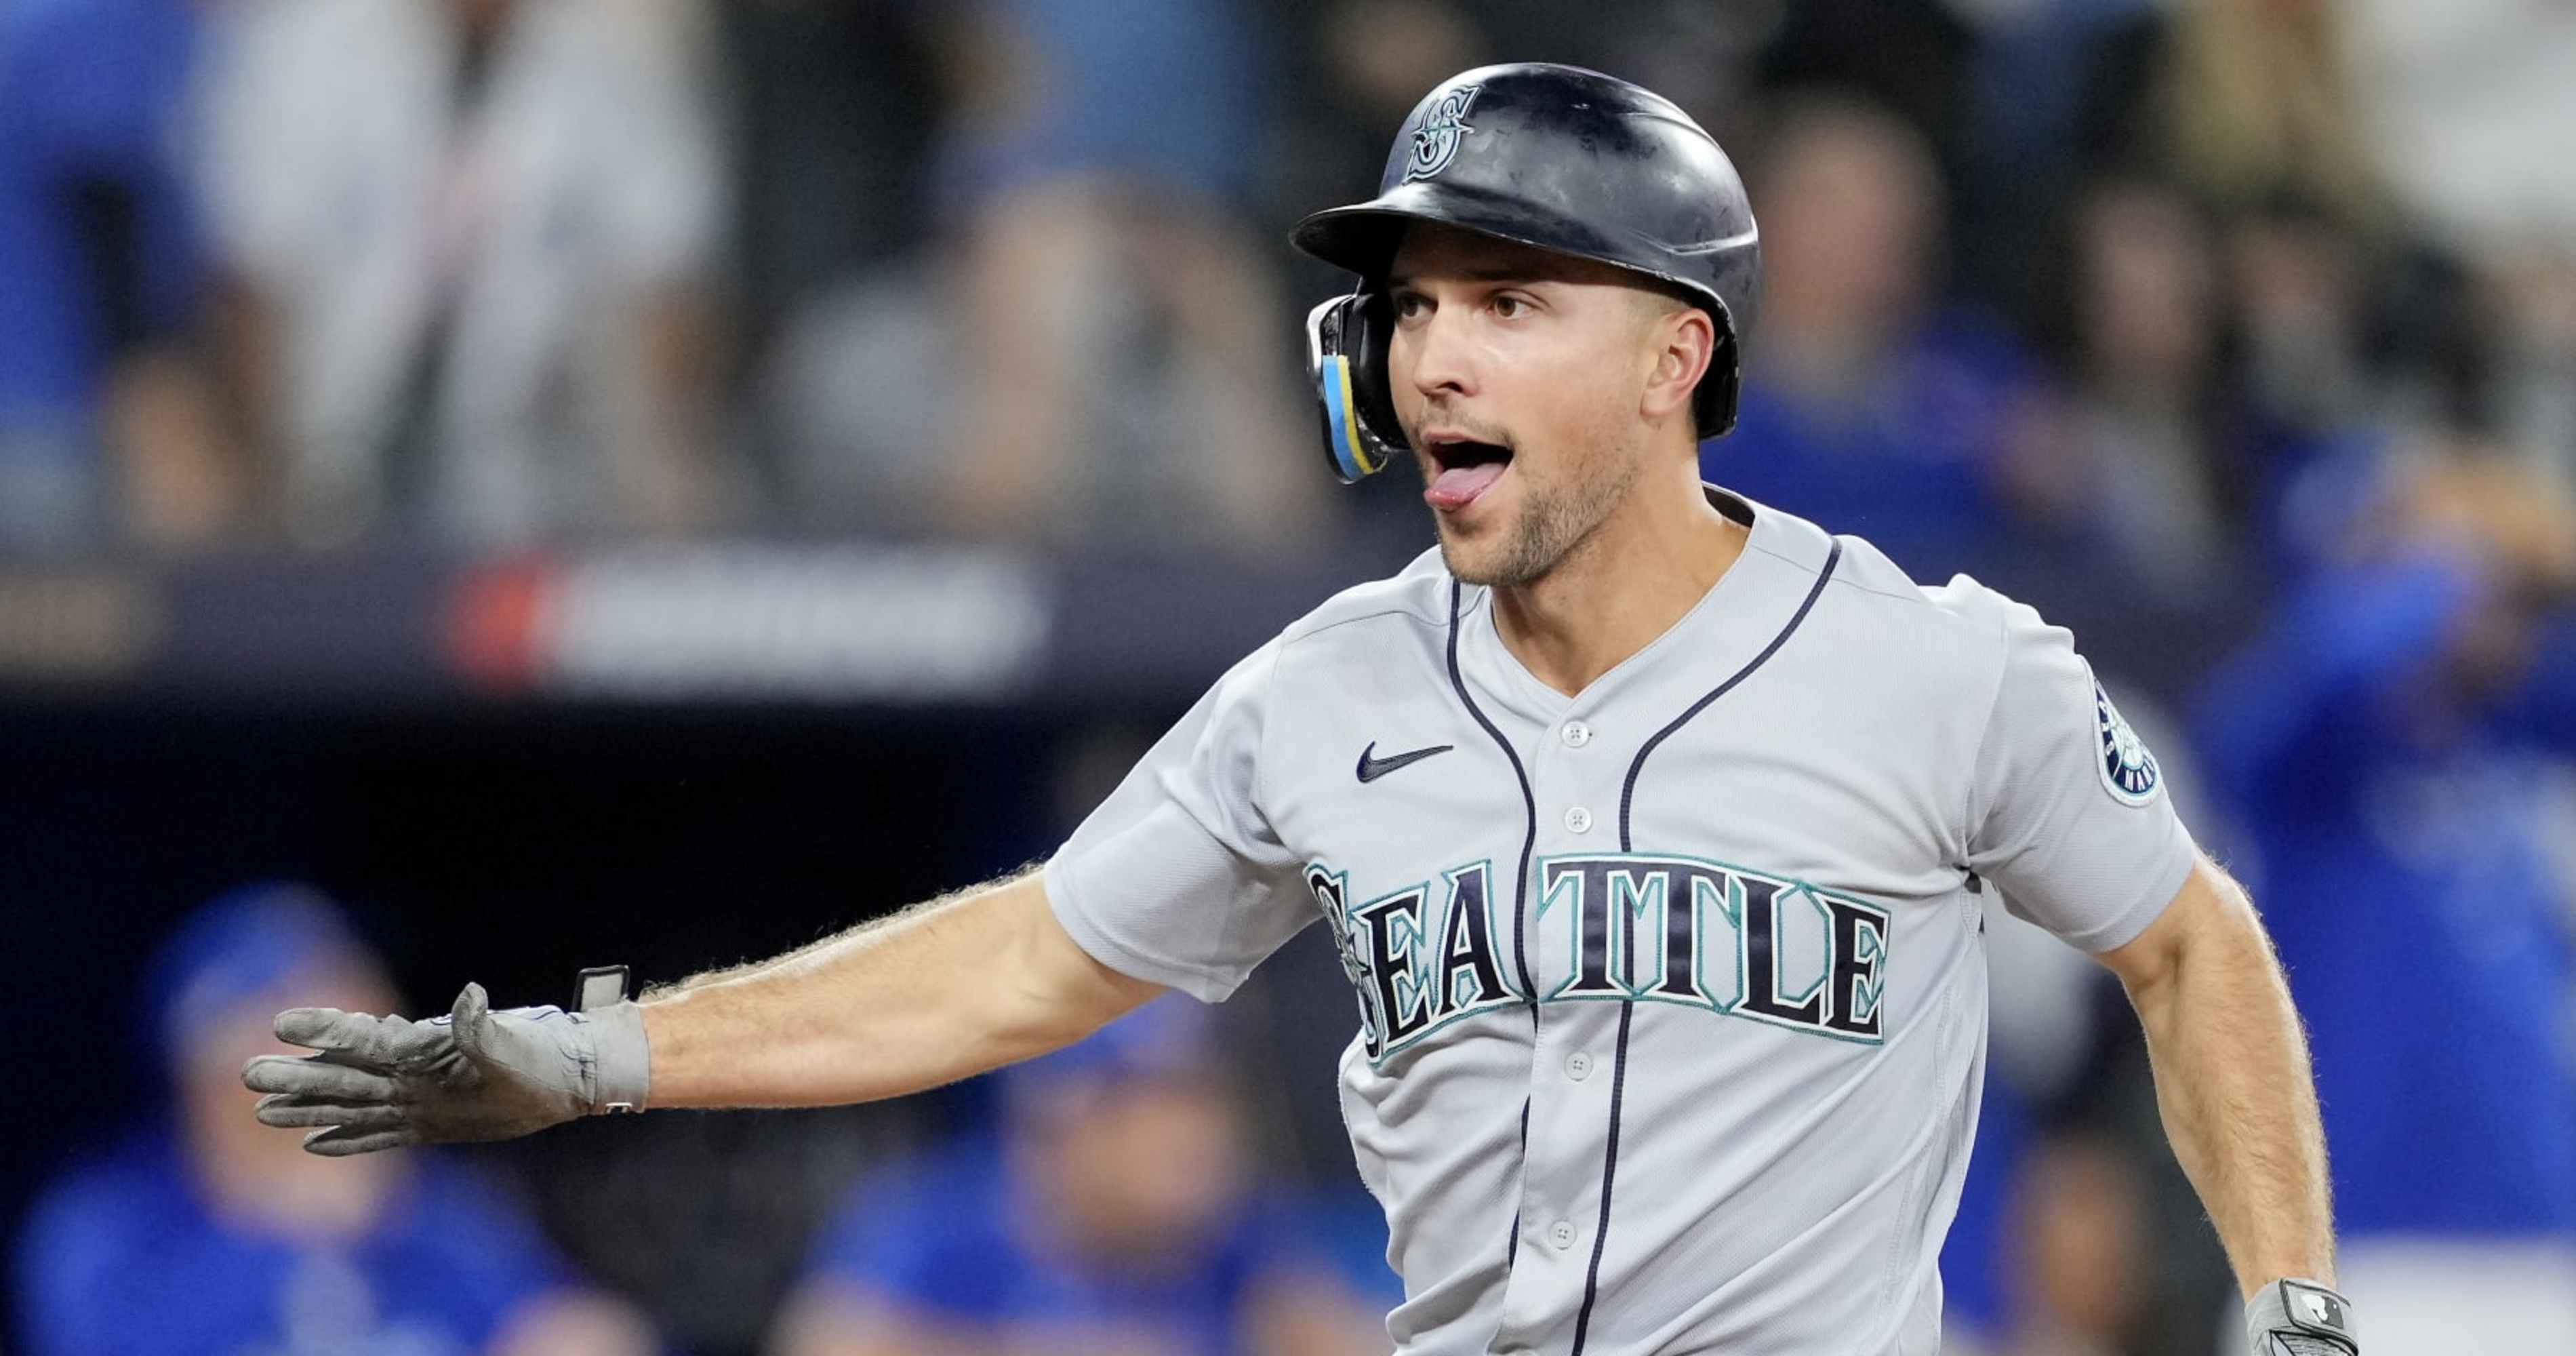  MLB - For the record, Mariners will be rested